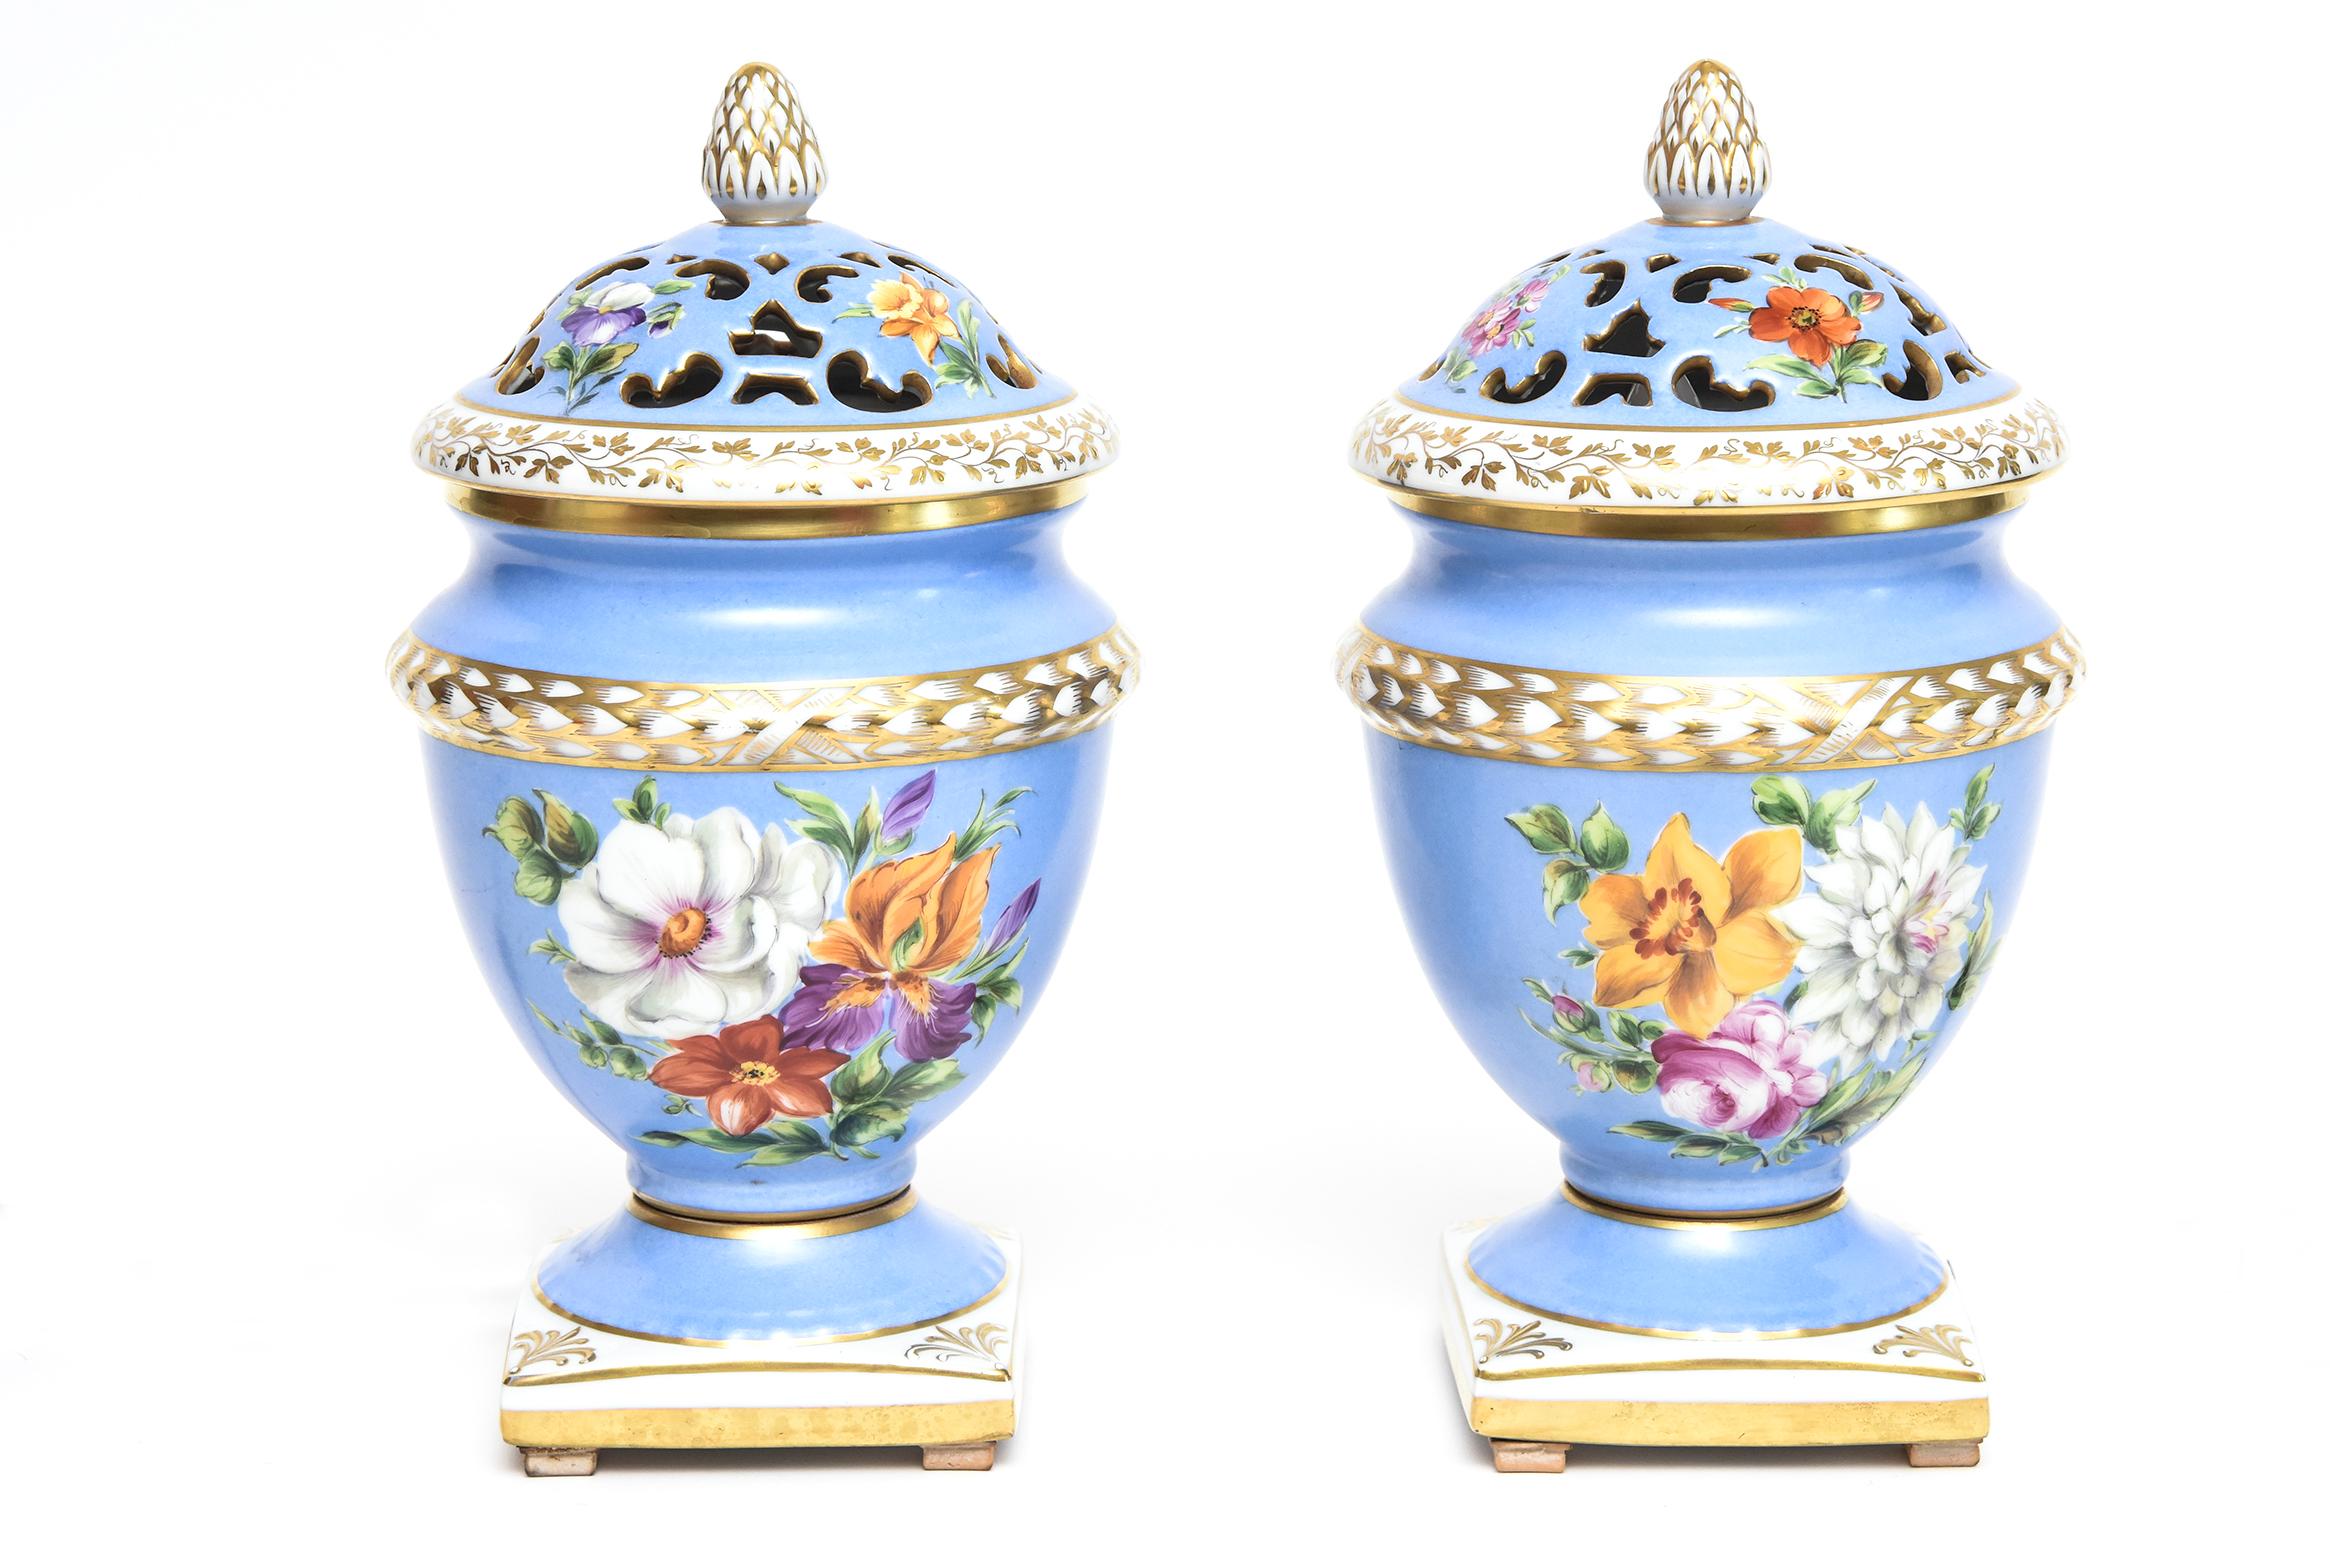 Mid 20th Century Le Tallec porcelain pair of pale blue and white Paris potpourri with painted flower decorations and gold trim. The have removable lids and have been electrified into lamps. On the bottom there is a Le Tallec mark with an 